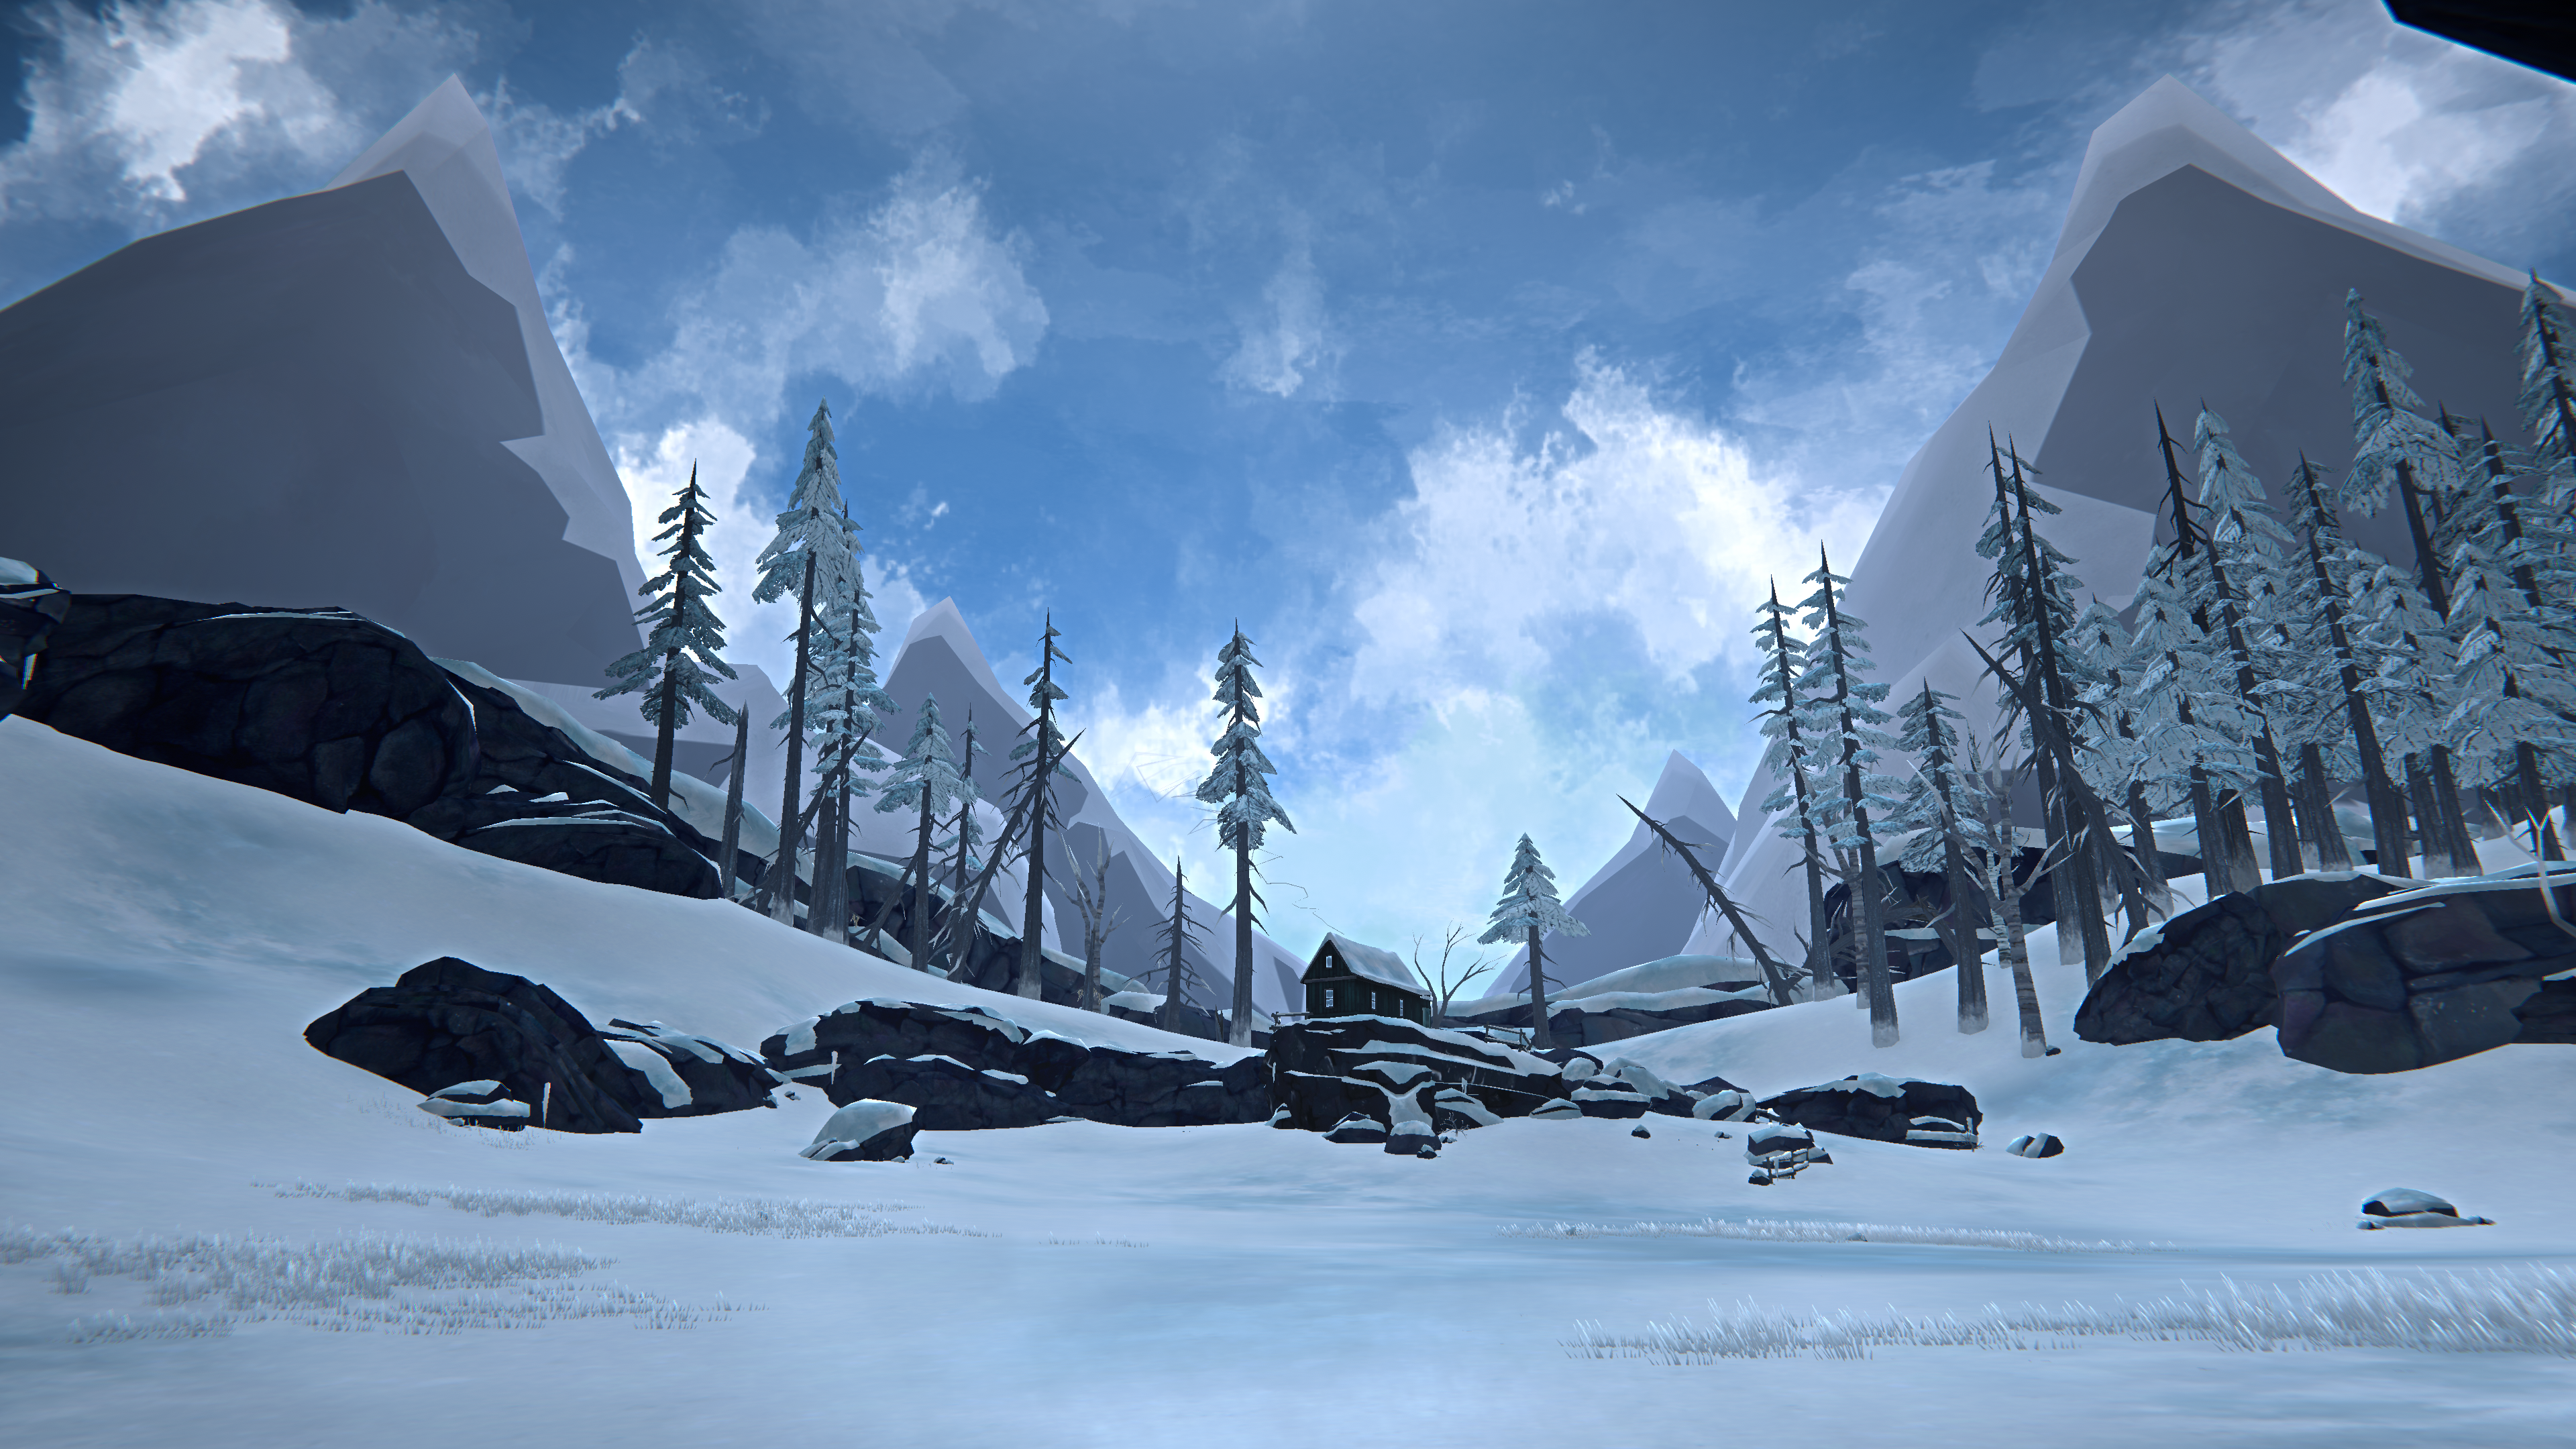 Video Game Landscape Video Games Screen Shot The Long Dark Snow PC Gaming Survival Video Game Art Mo 3840x2160